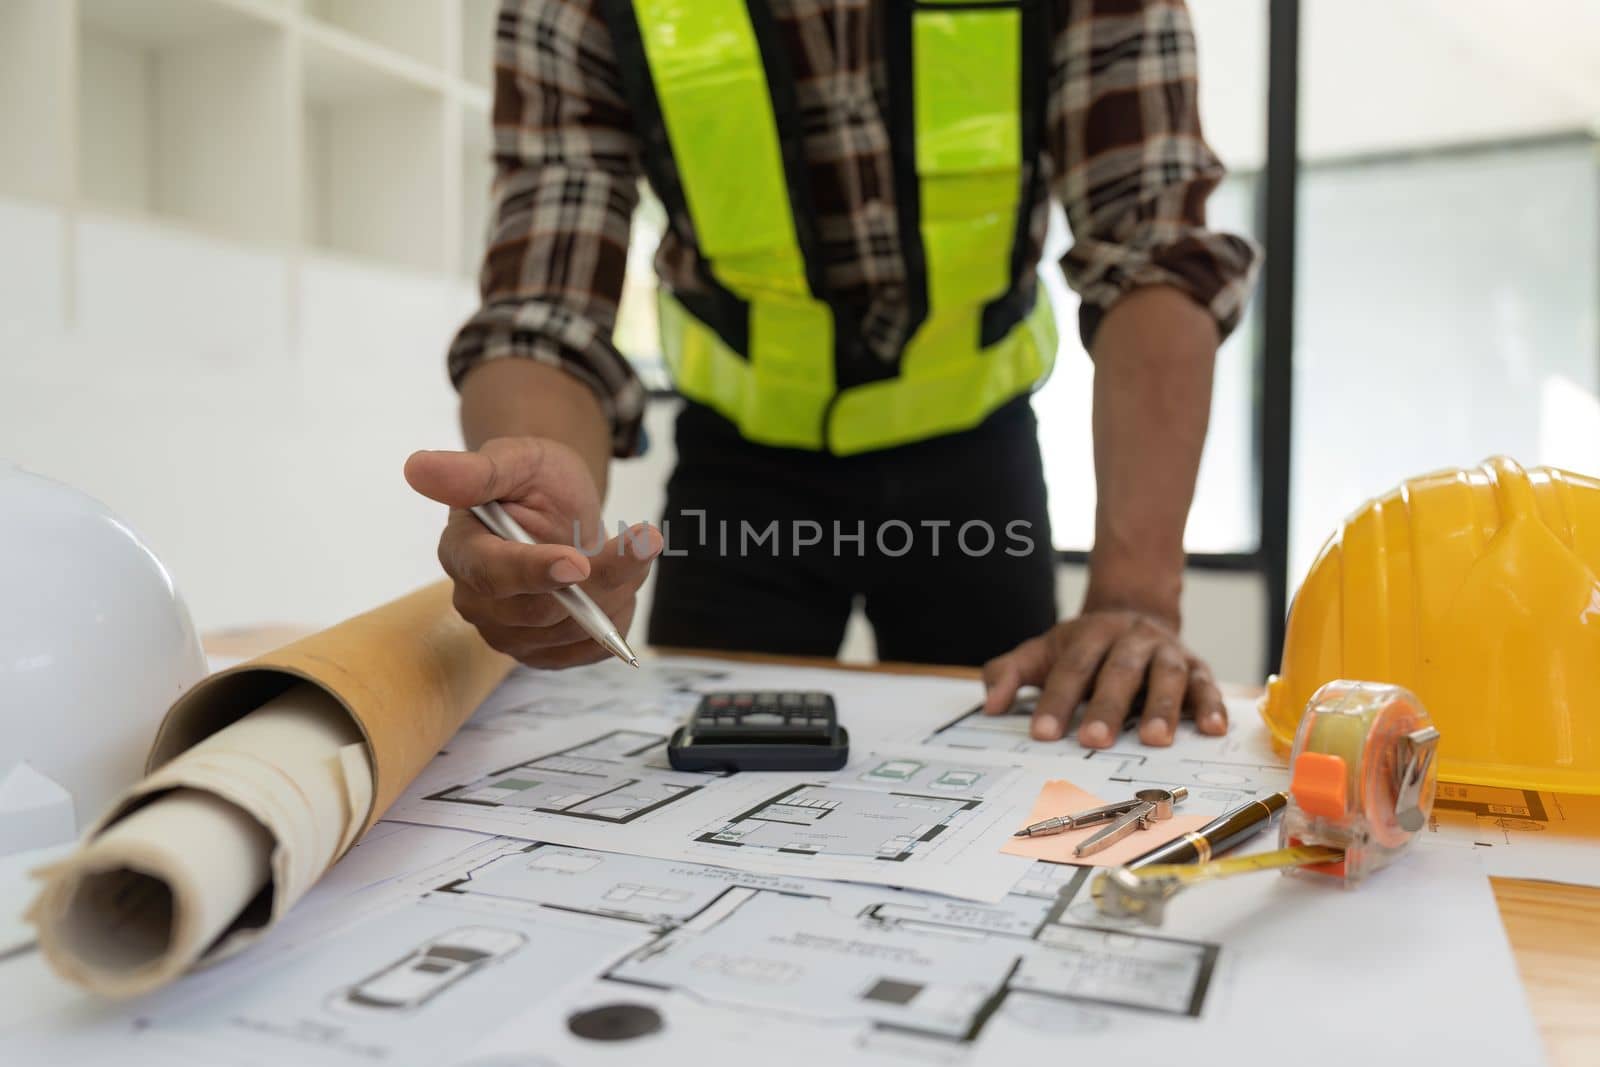 Architect or engineer working with blueprints for architectural plan, engineer sketching a construction project, green energy concept.